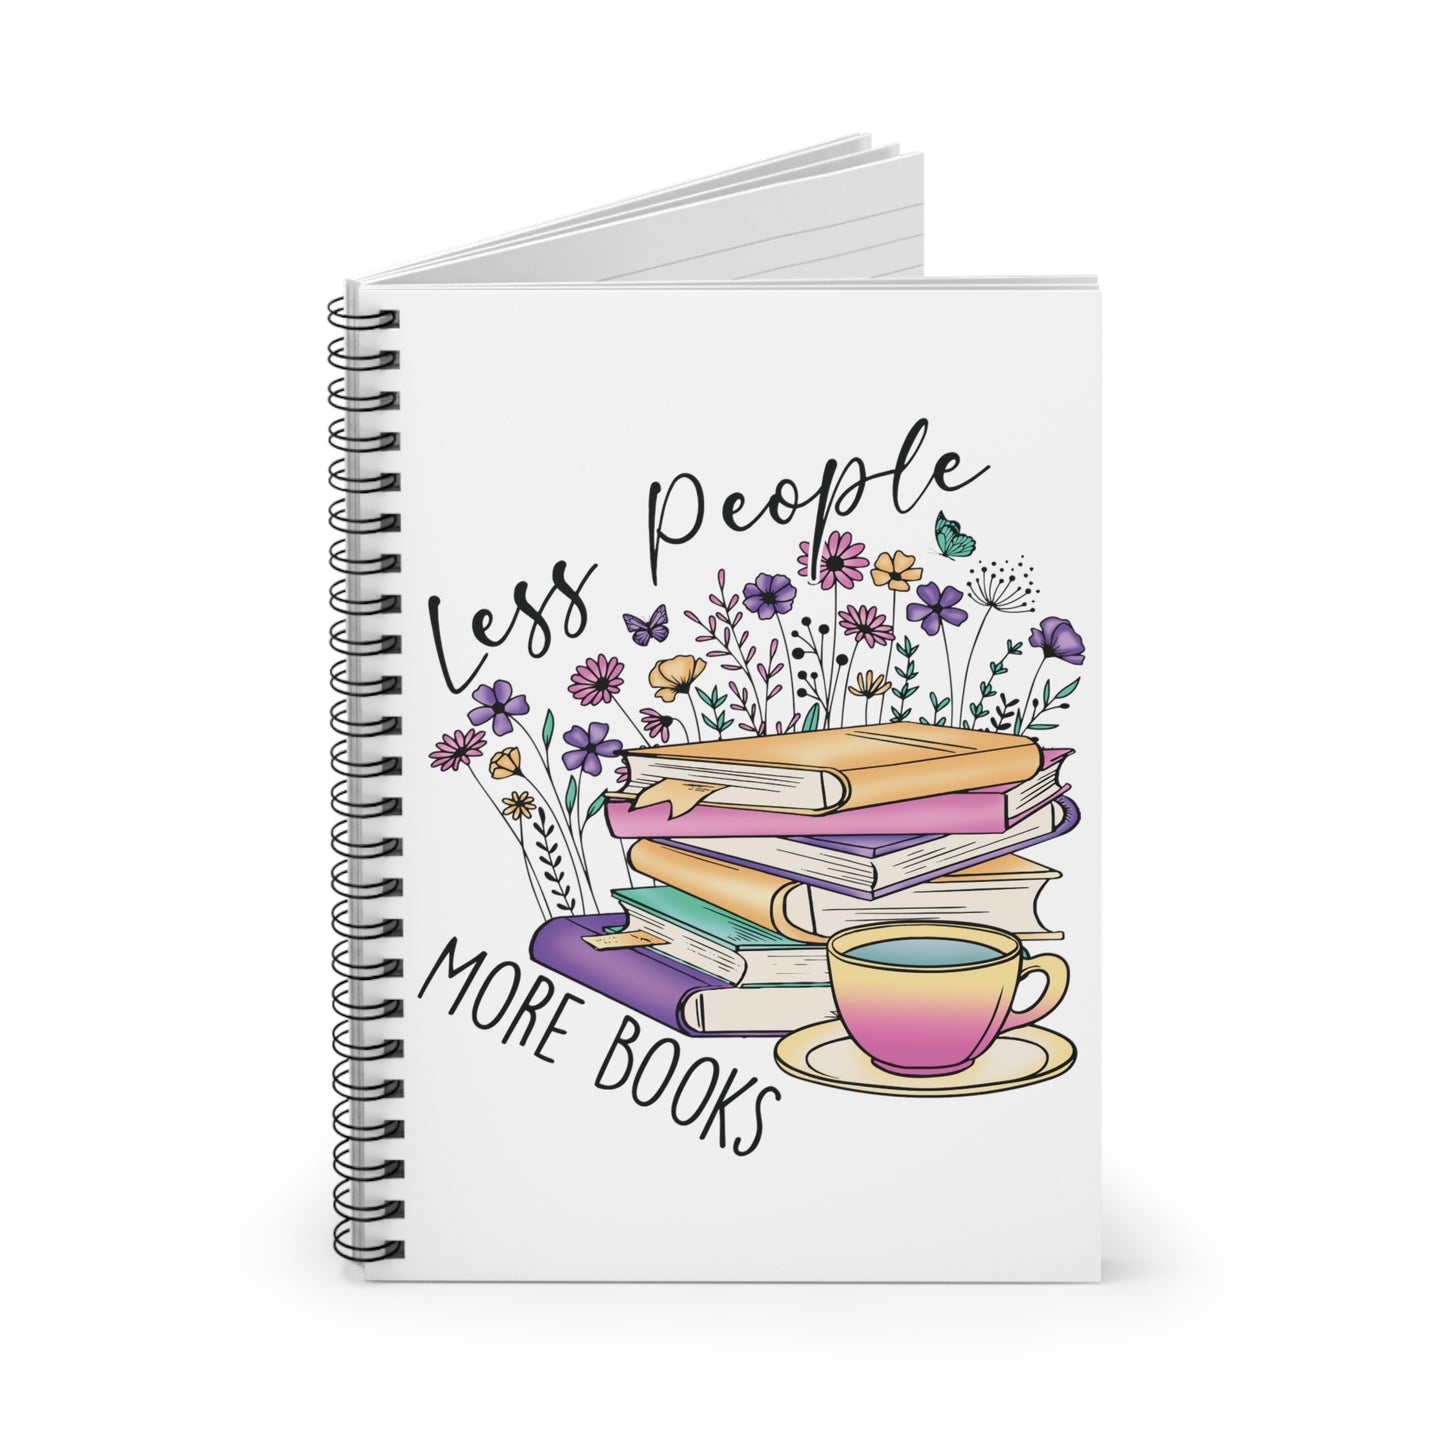 Happiness Is: Spiral Notebook - Log Books - Journals - Diaries - and More Custom Printed by TheGlassyLass.com